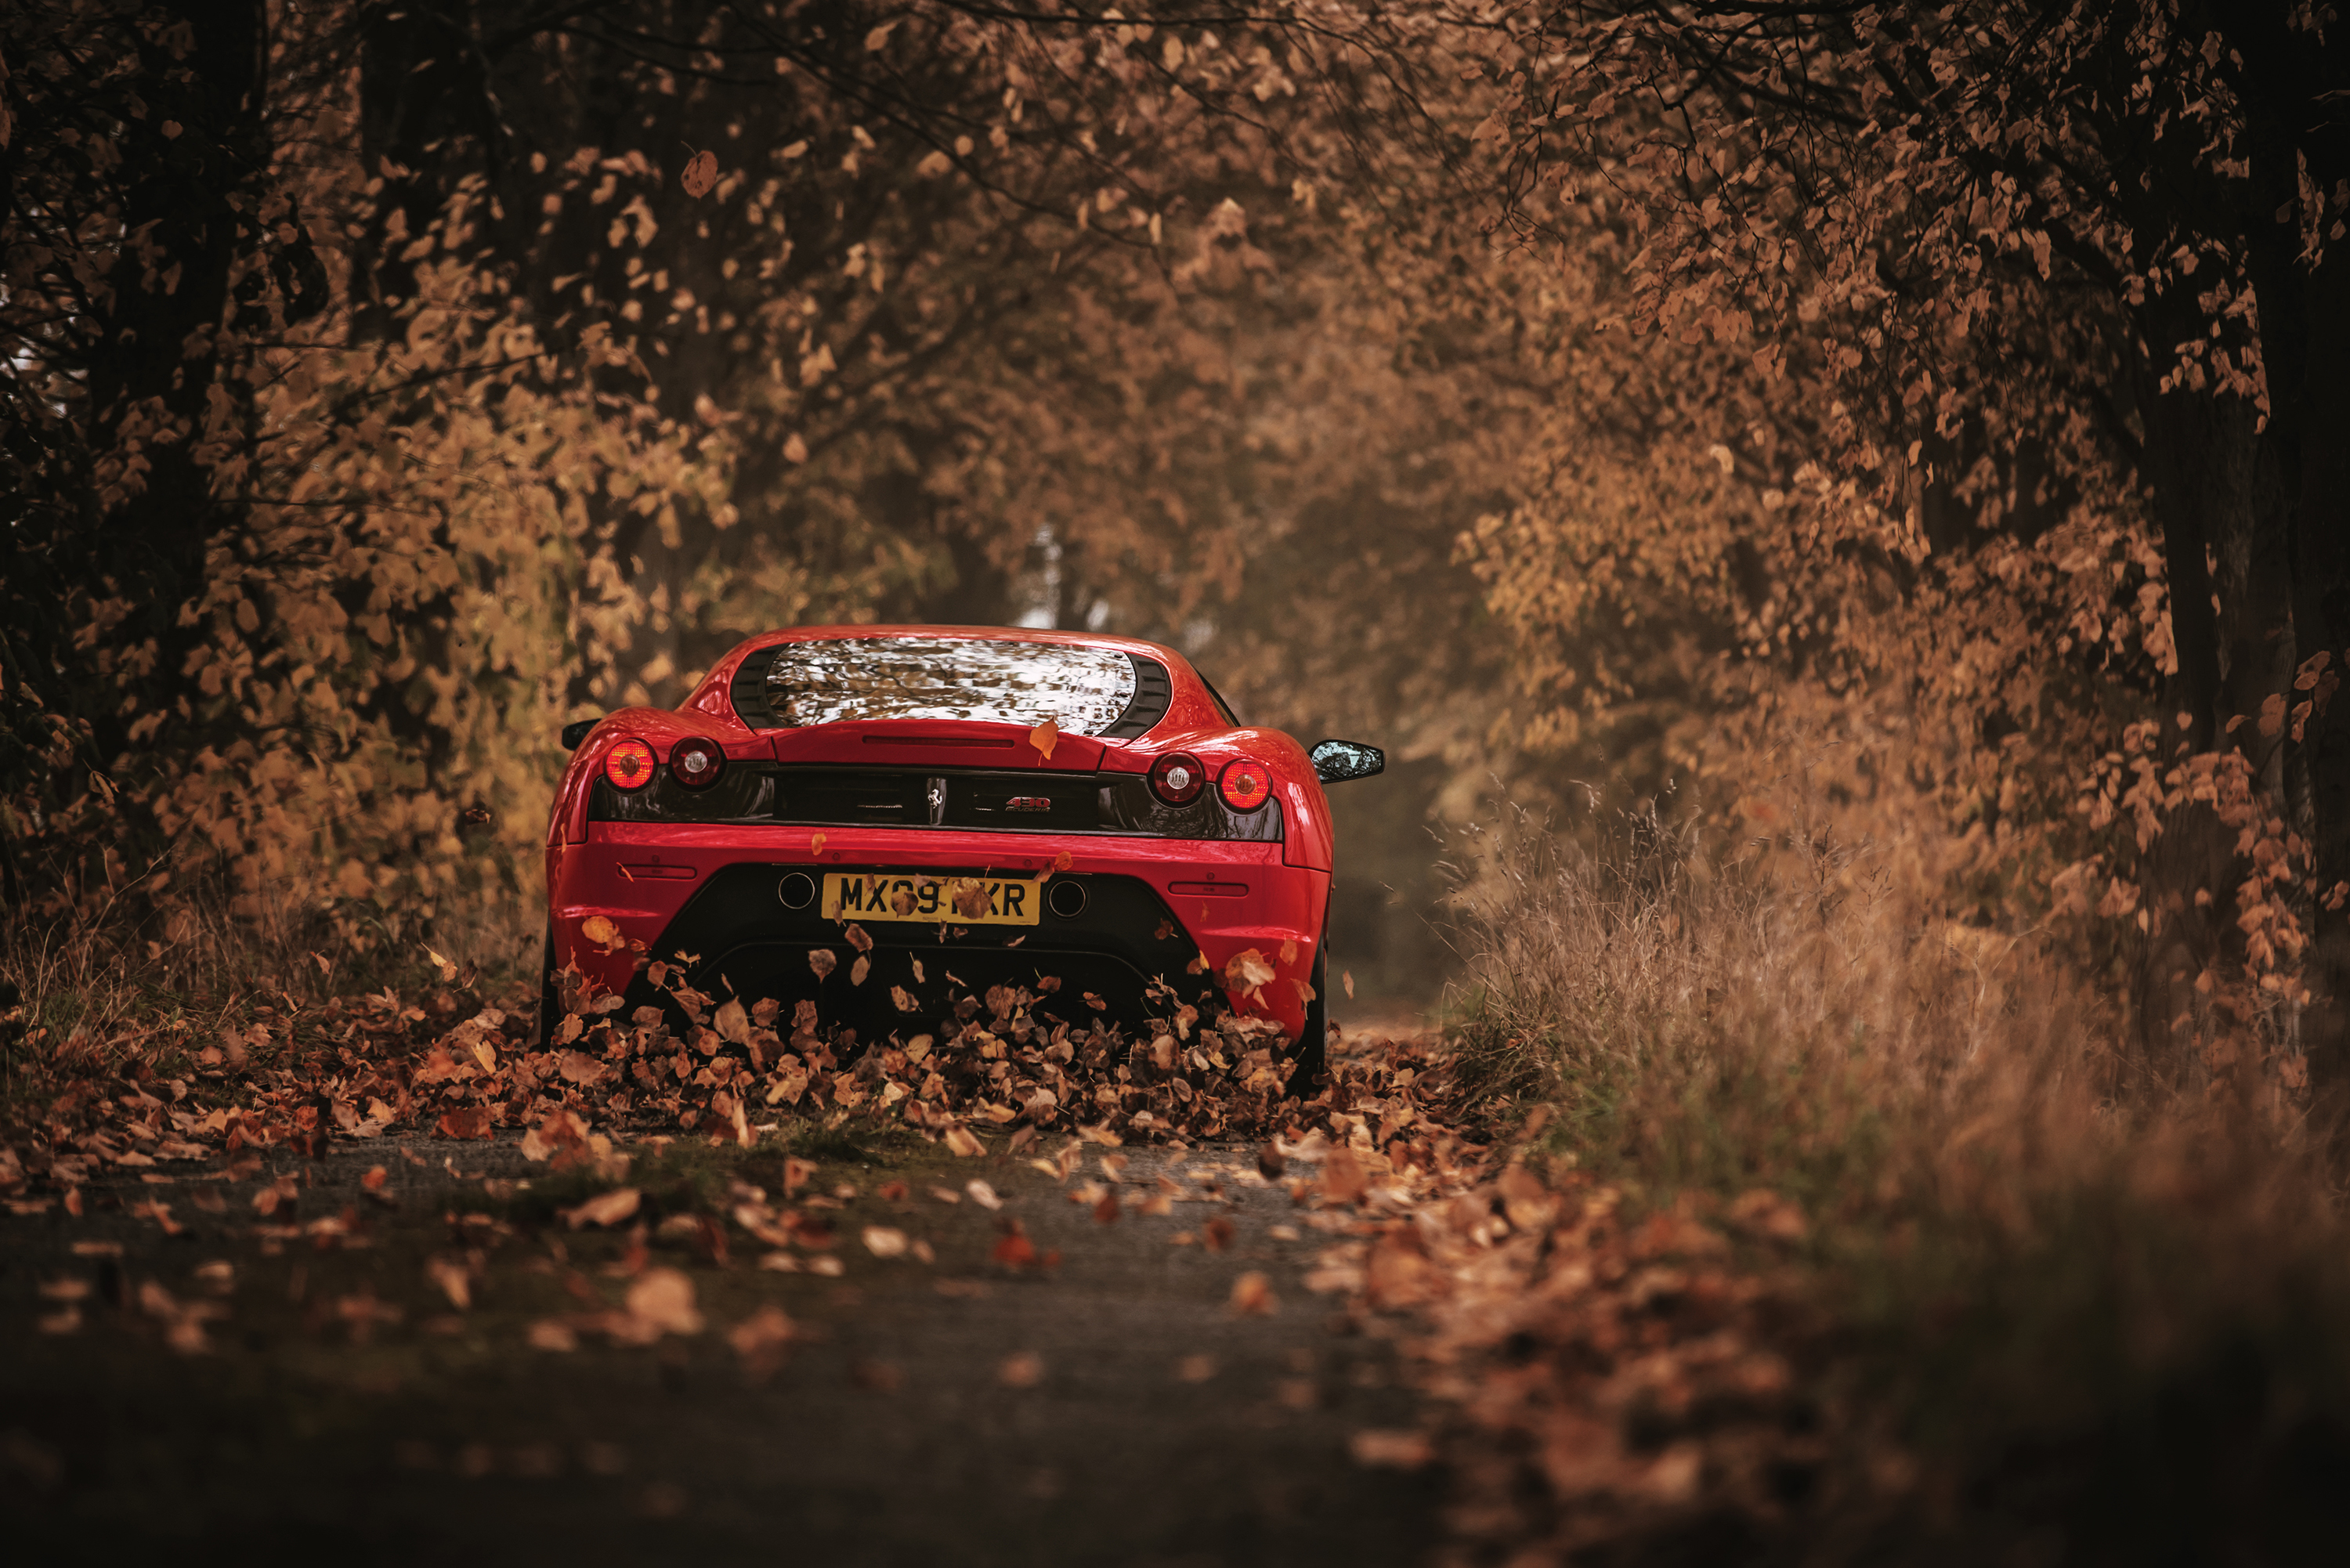 Ile ferrari cars back view racing scuderia autumn rear view download the picture for free